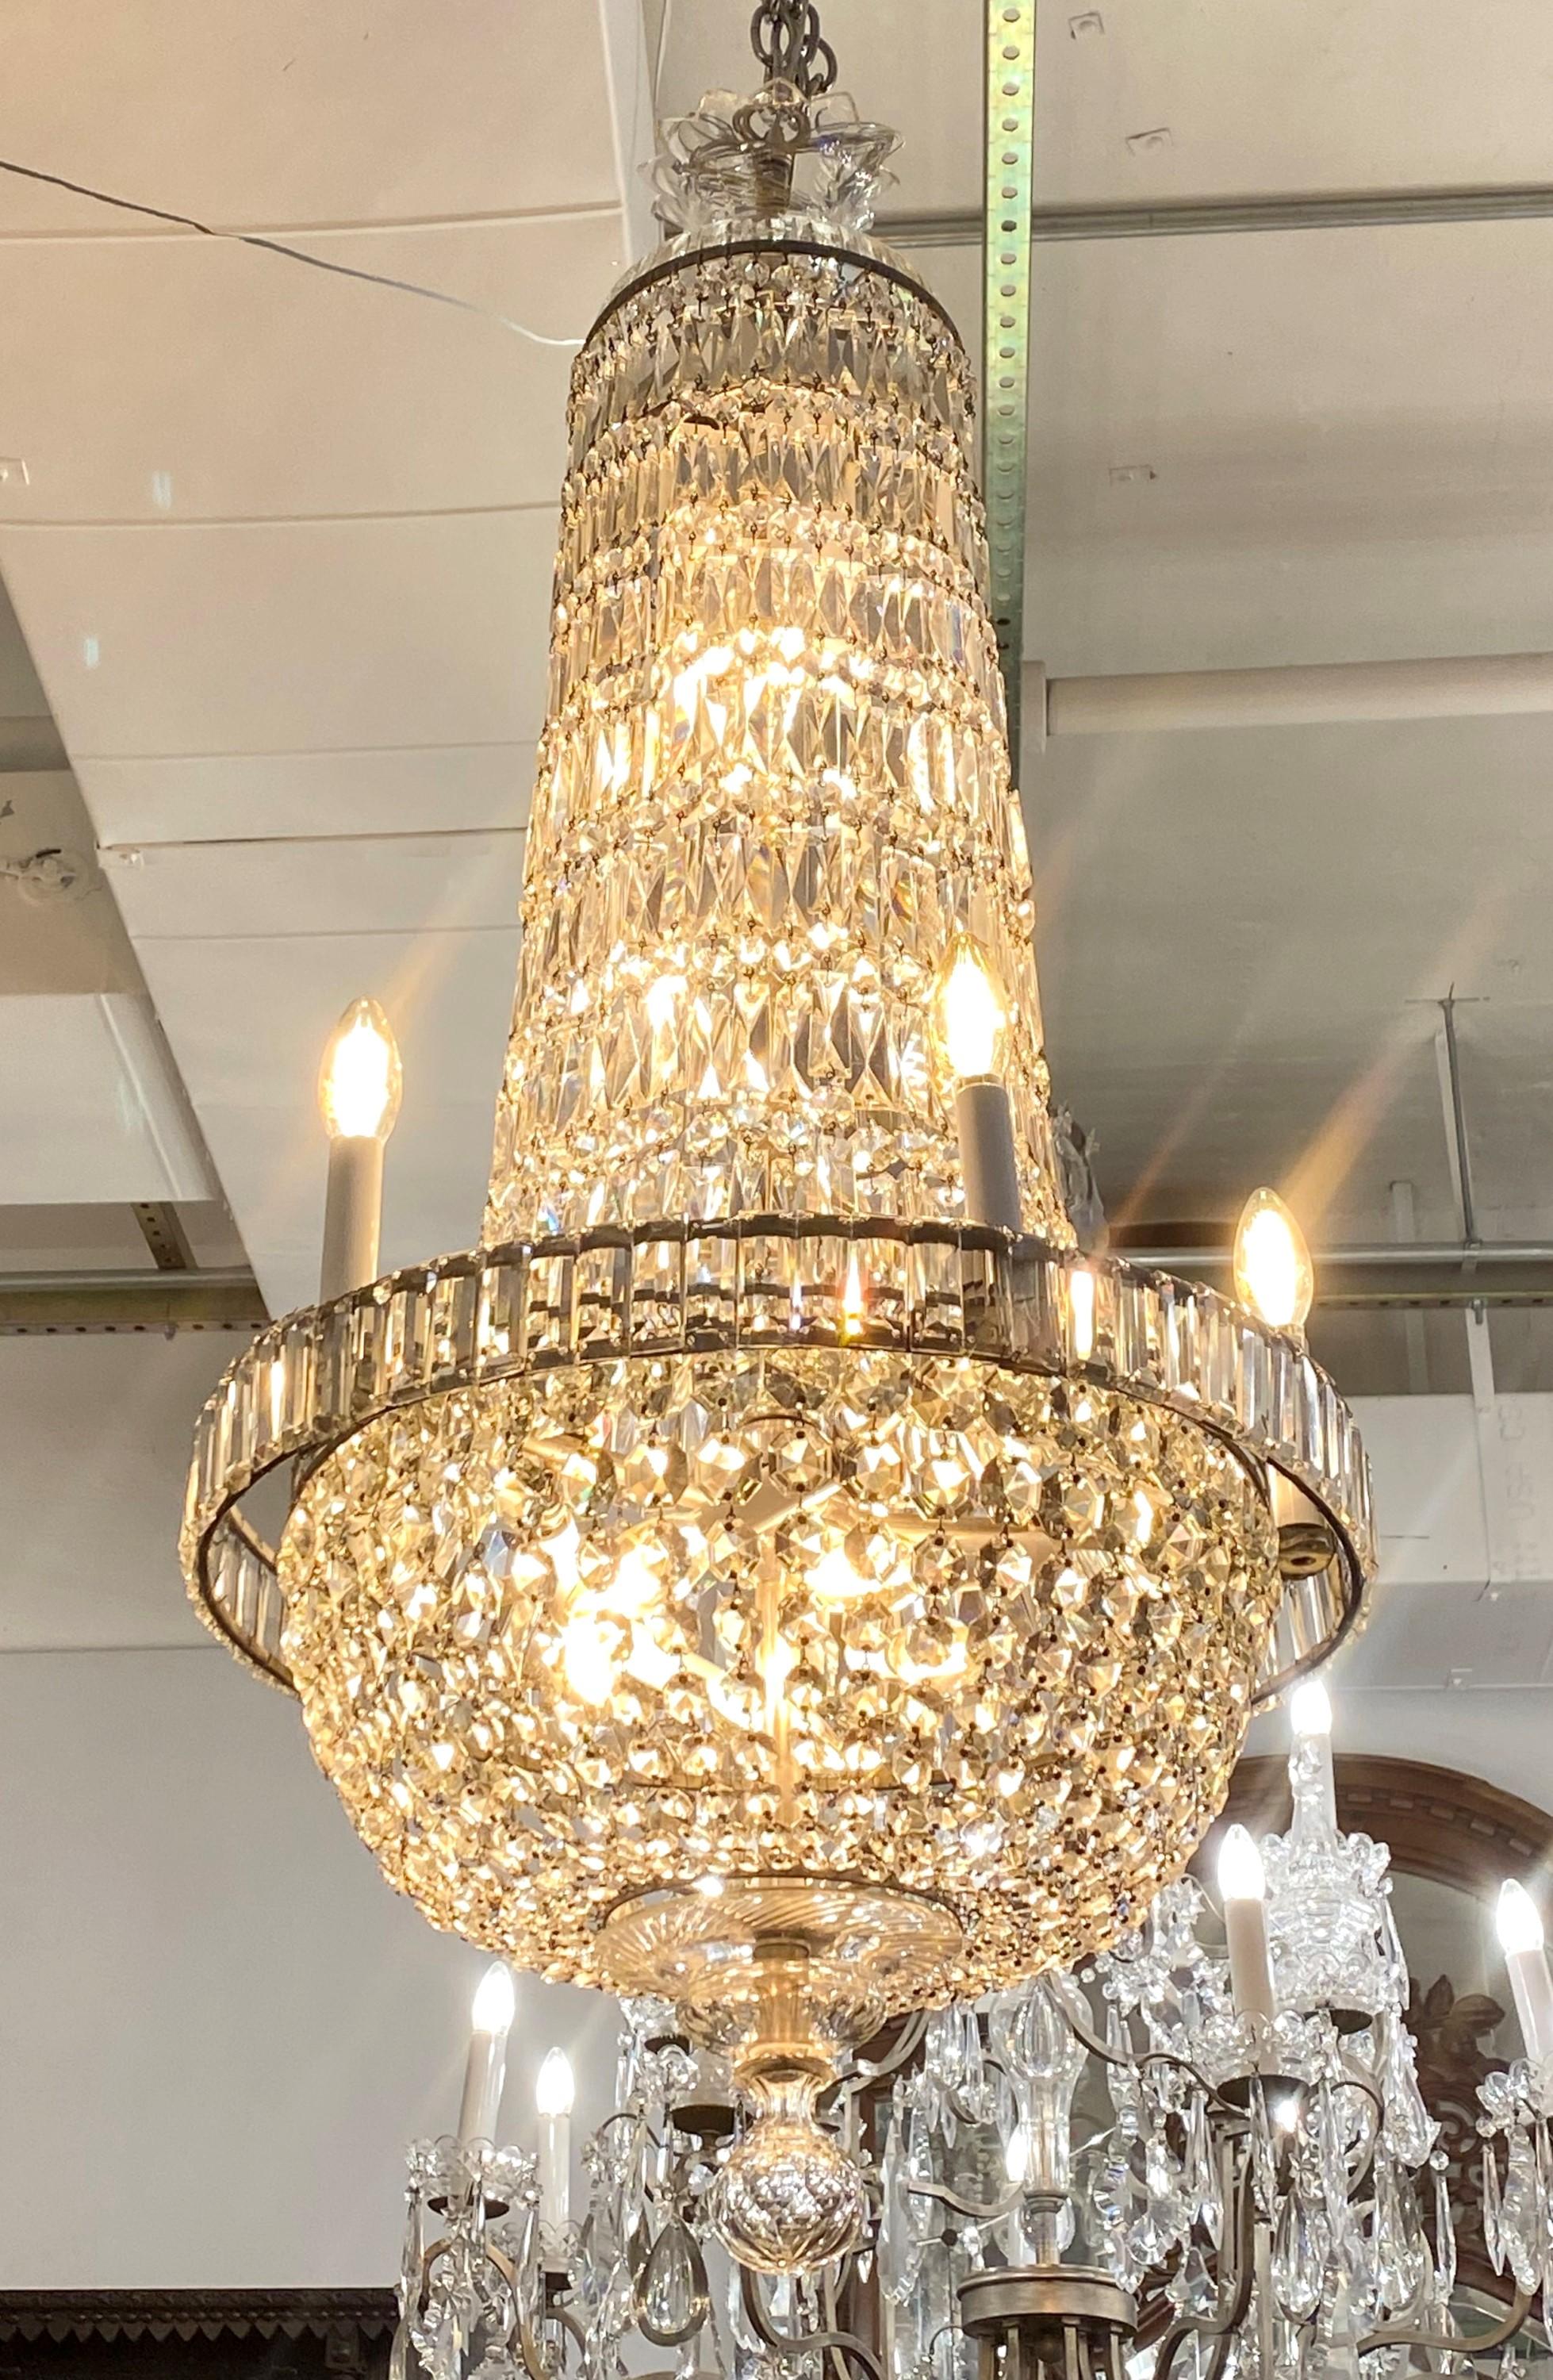 Early 20th century crystal French Empire basket chandelier. Brass finish and the candelabra body. Cleaned and restored. Takes 17 standard candelabra lightbulbs. Please note, this item is located in one of our NYC locations.